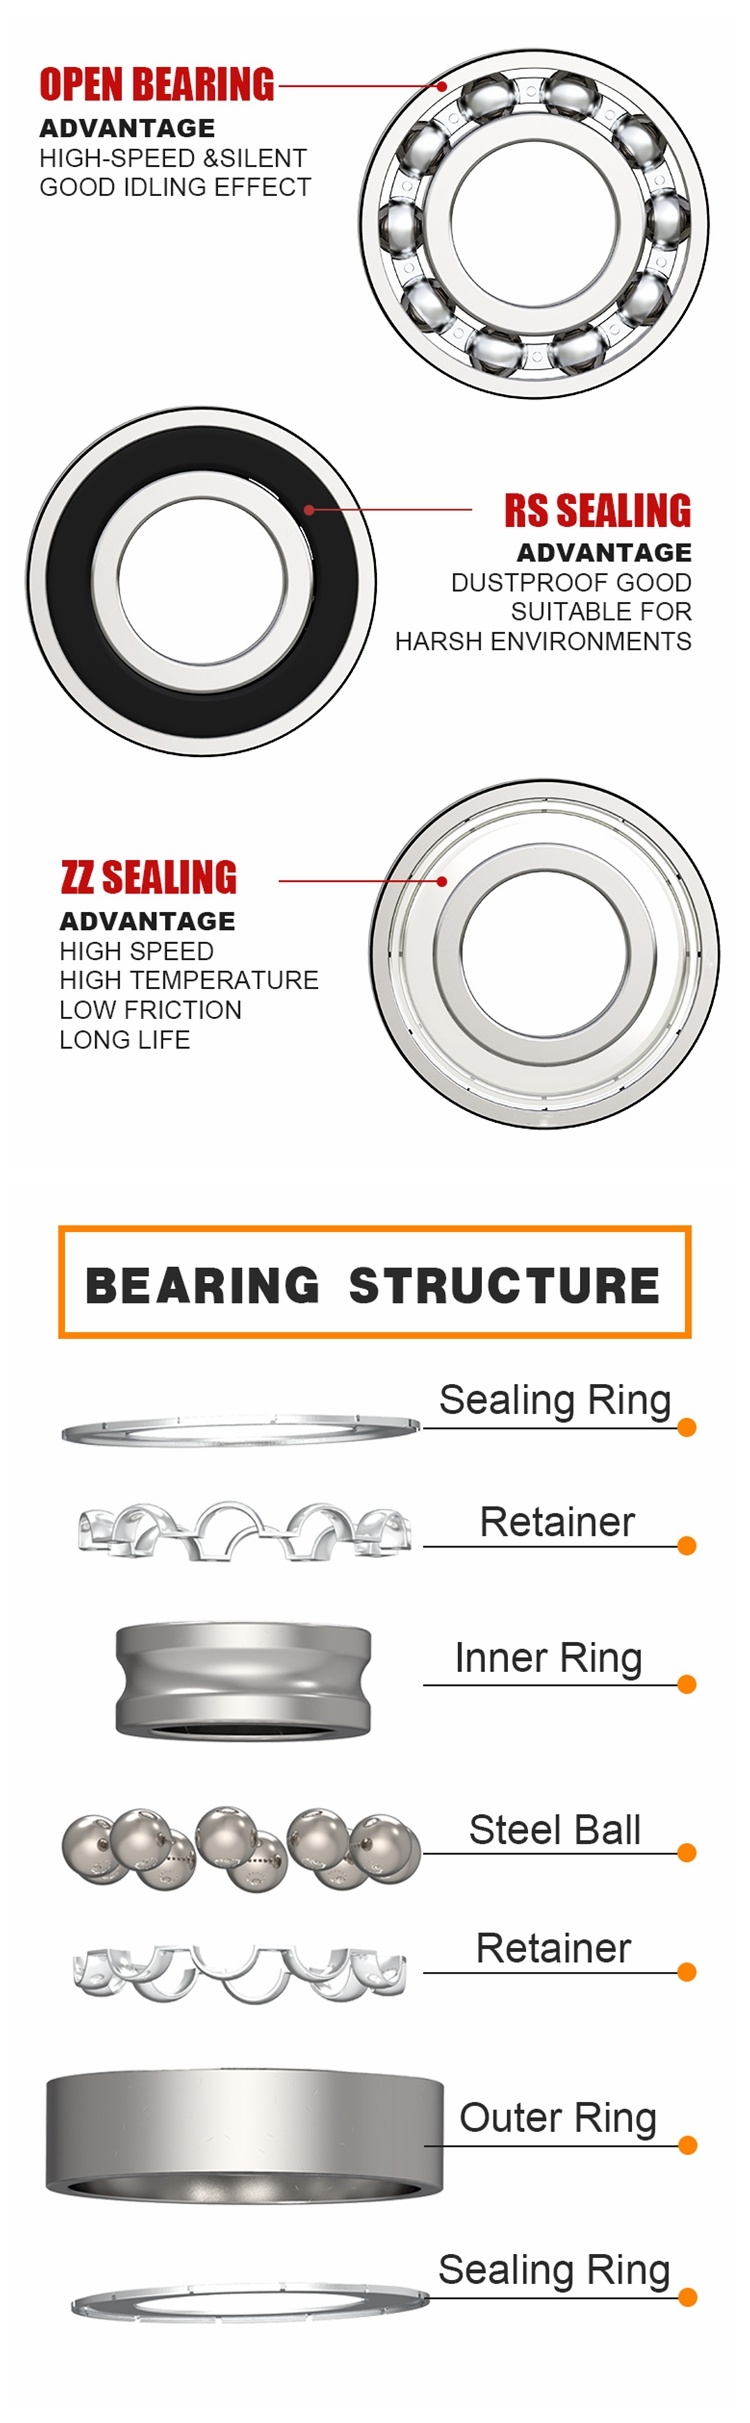 ABEC-5 Auto Parts Z3 16048 RS Deep Groove Ball Bearing